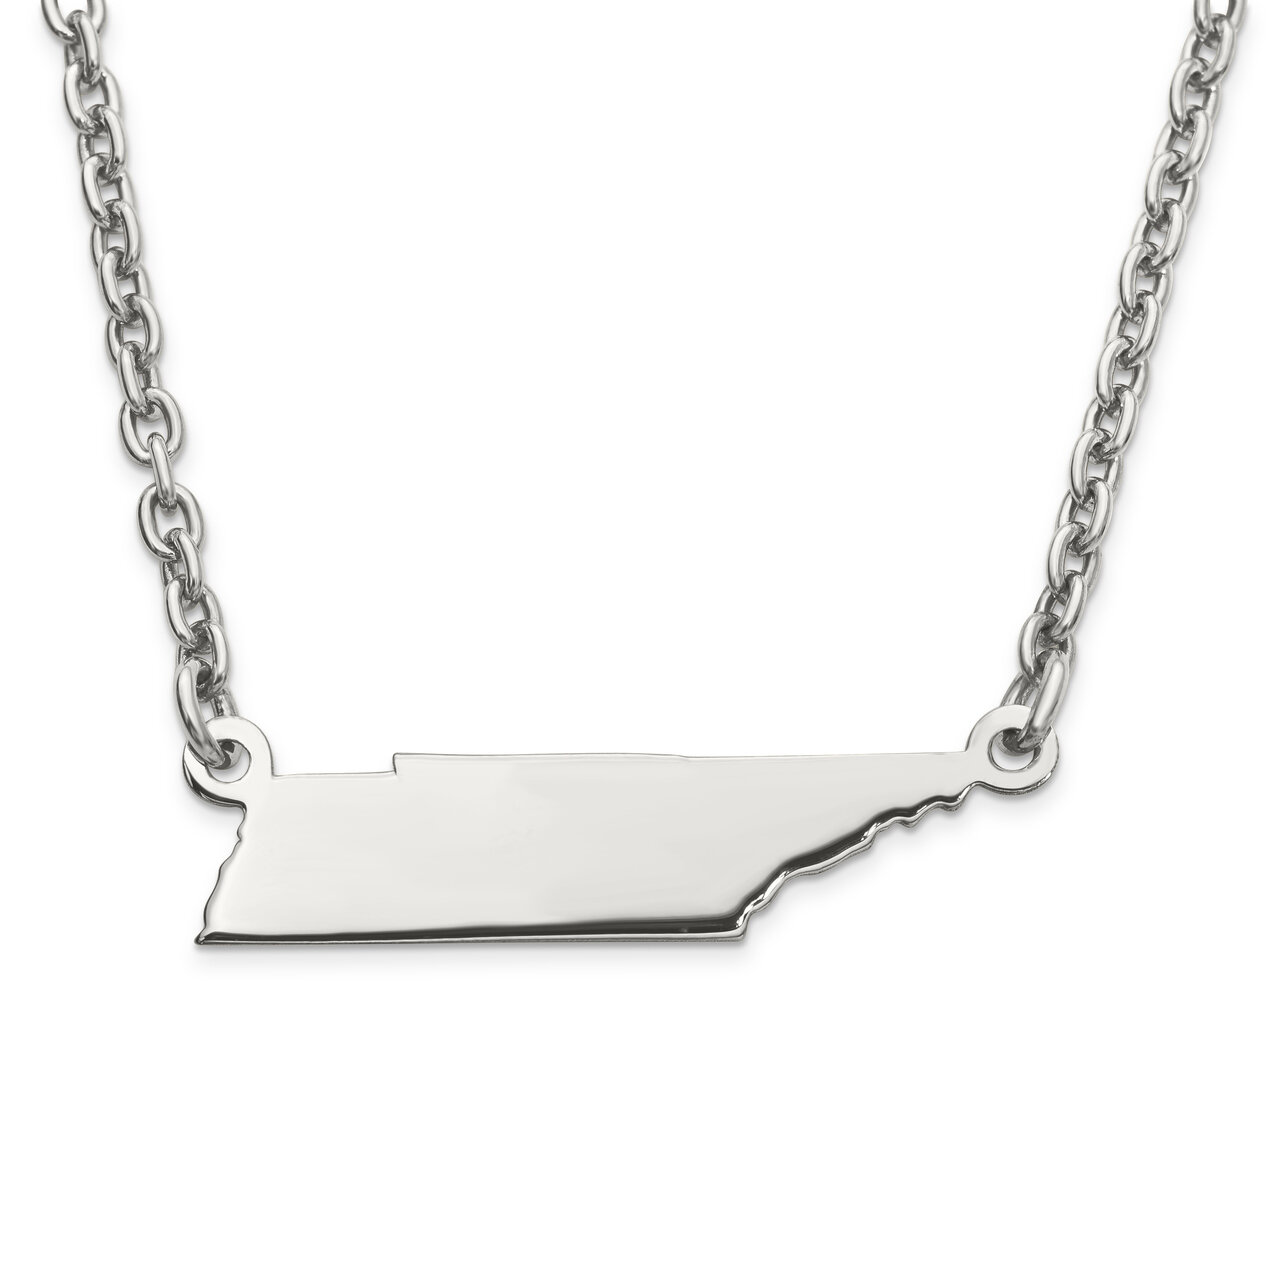 Tennessee State Pendant Necklace with Chain Sterling Silver Engravable XNA706SS-TN